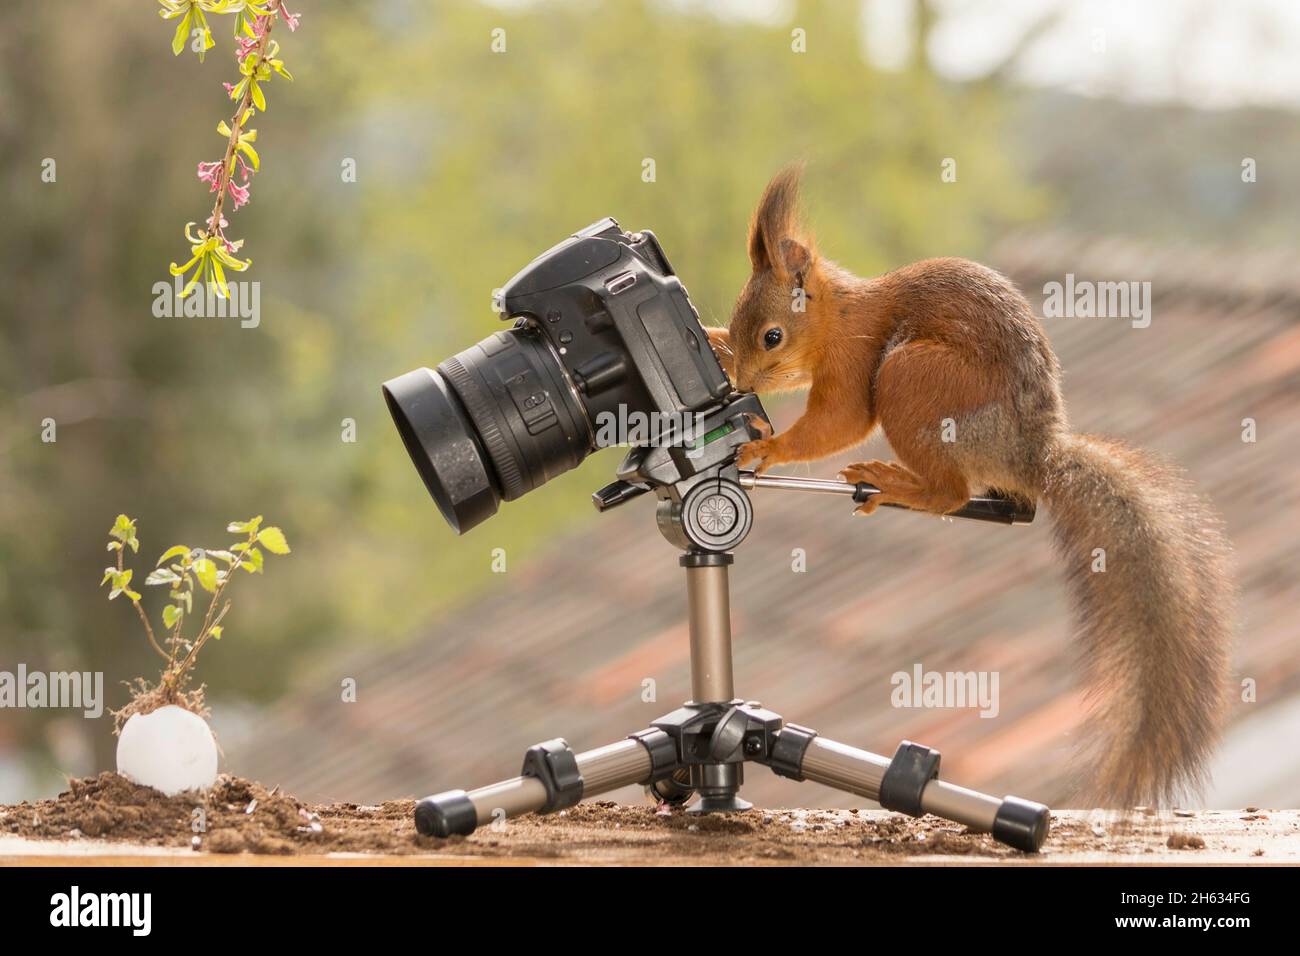 red squirrel who is standing behind a camera pointed at a egg with small plant Stock Photo